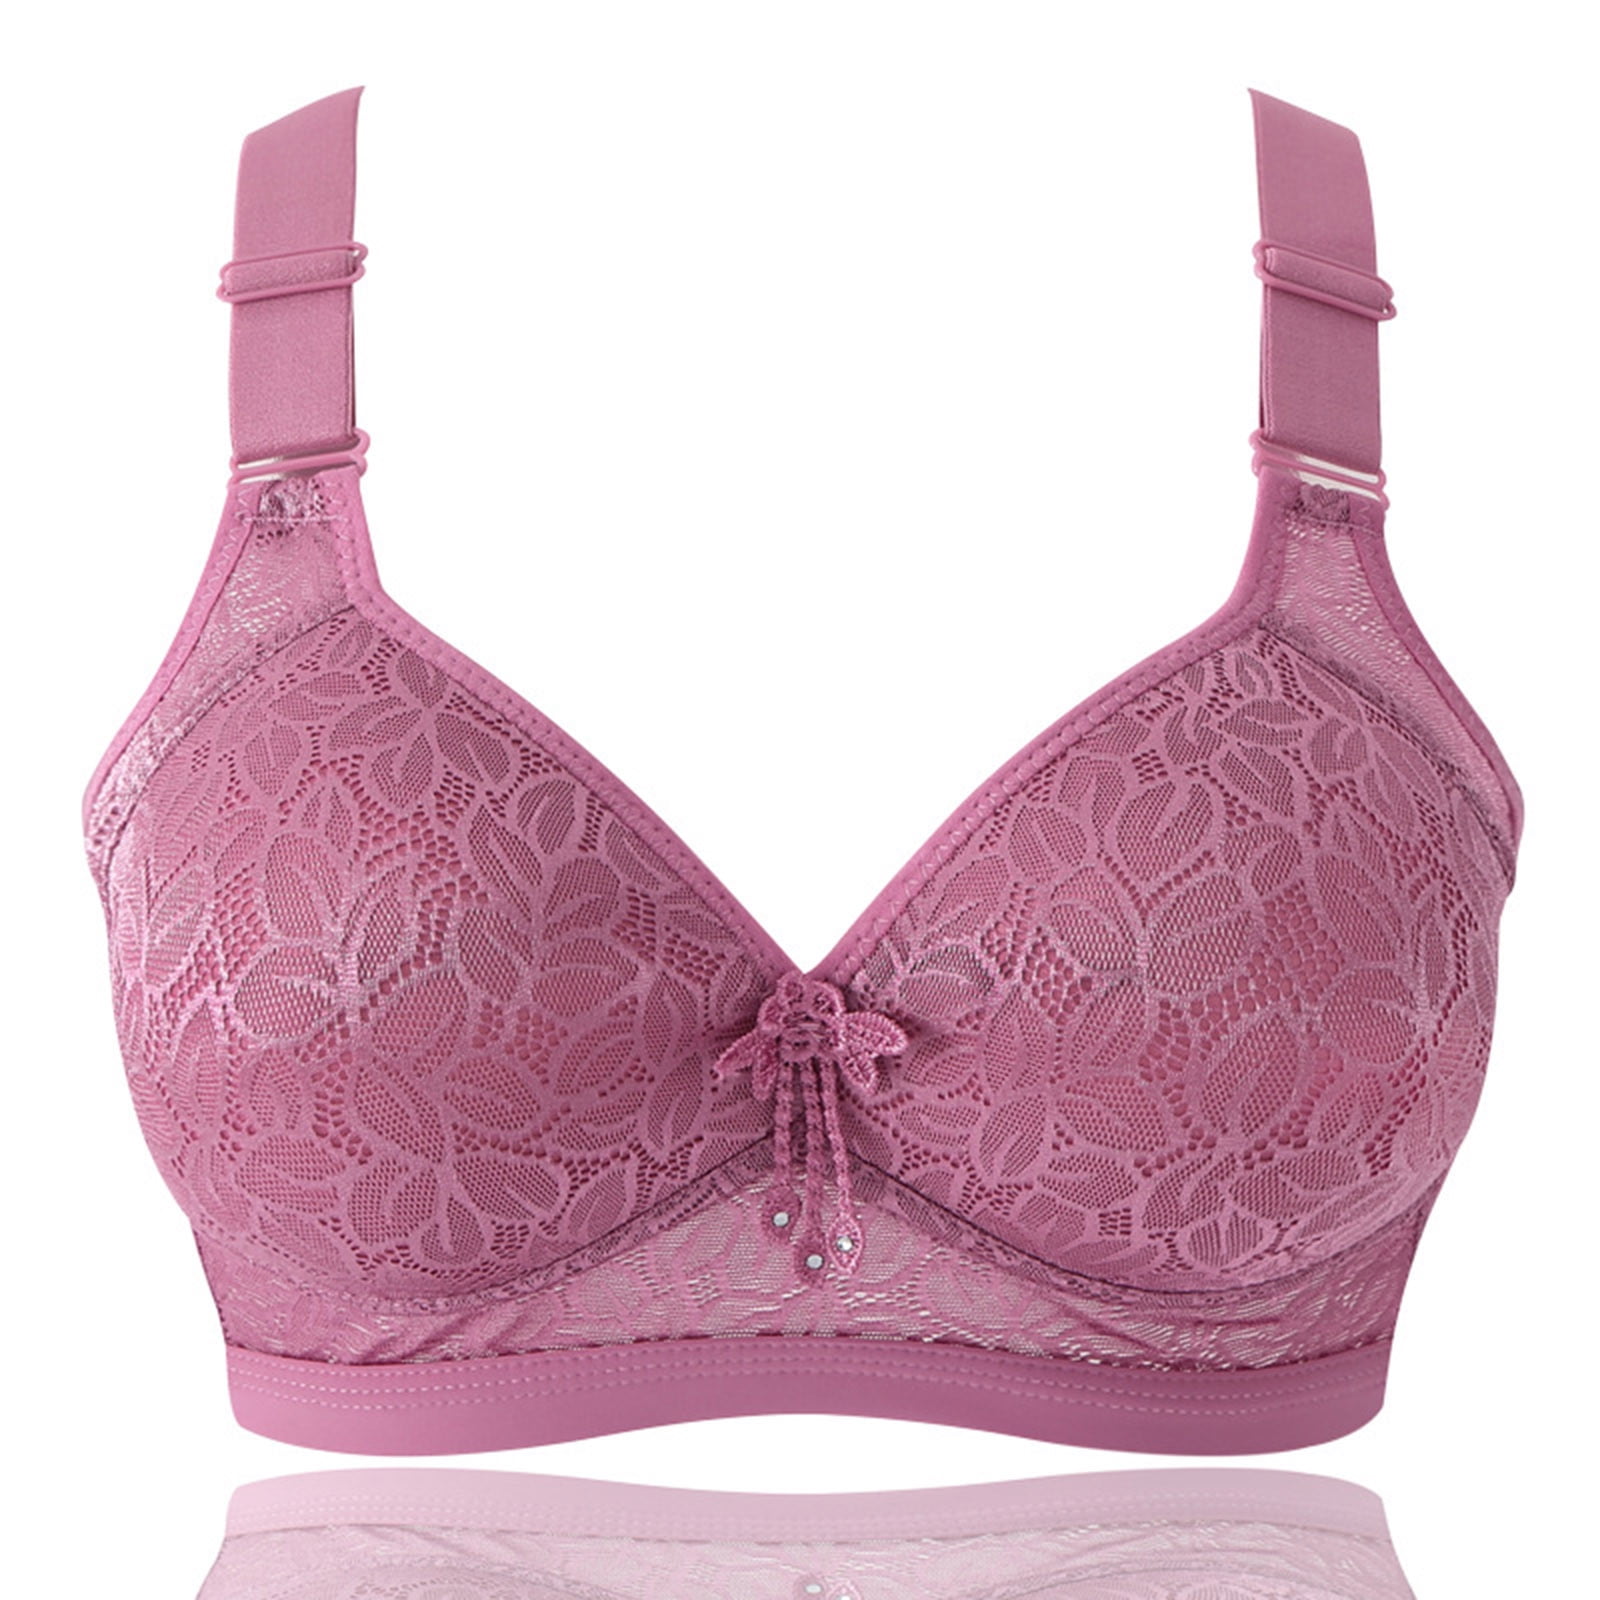 Anti-Sagging Breast Bra, Breathable Cool Lift up Air Bra, Seamless